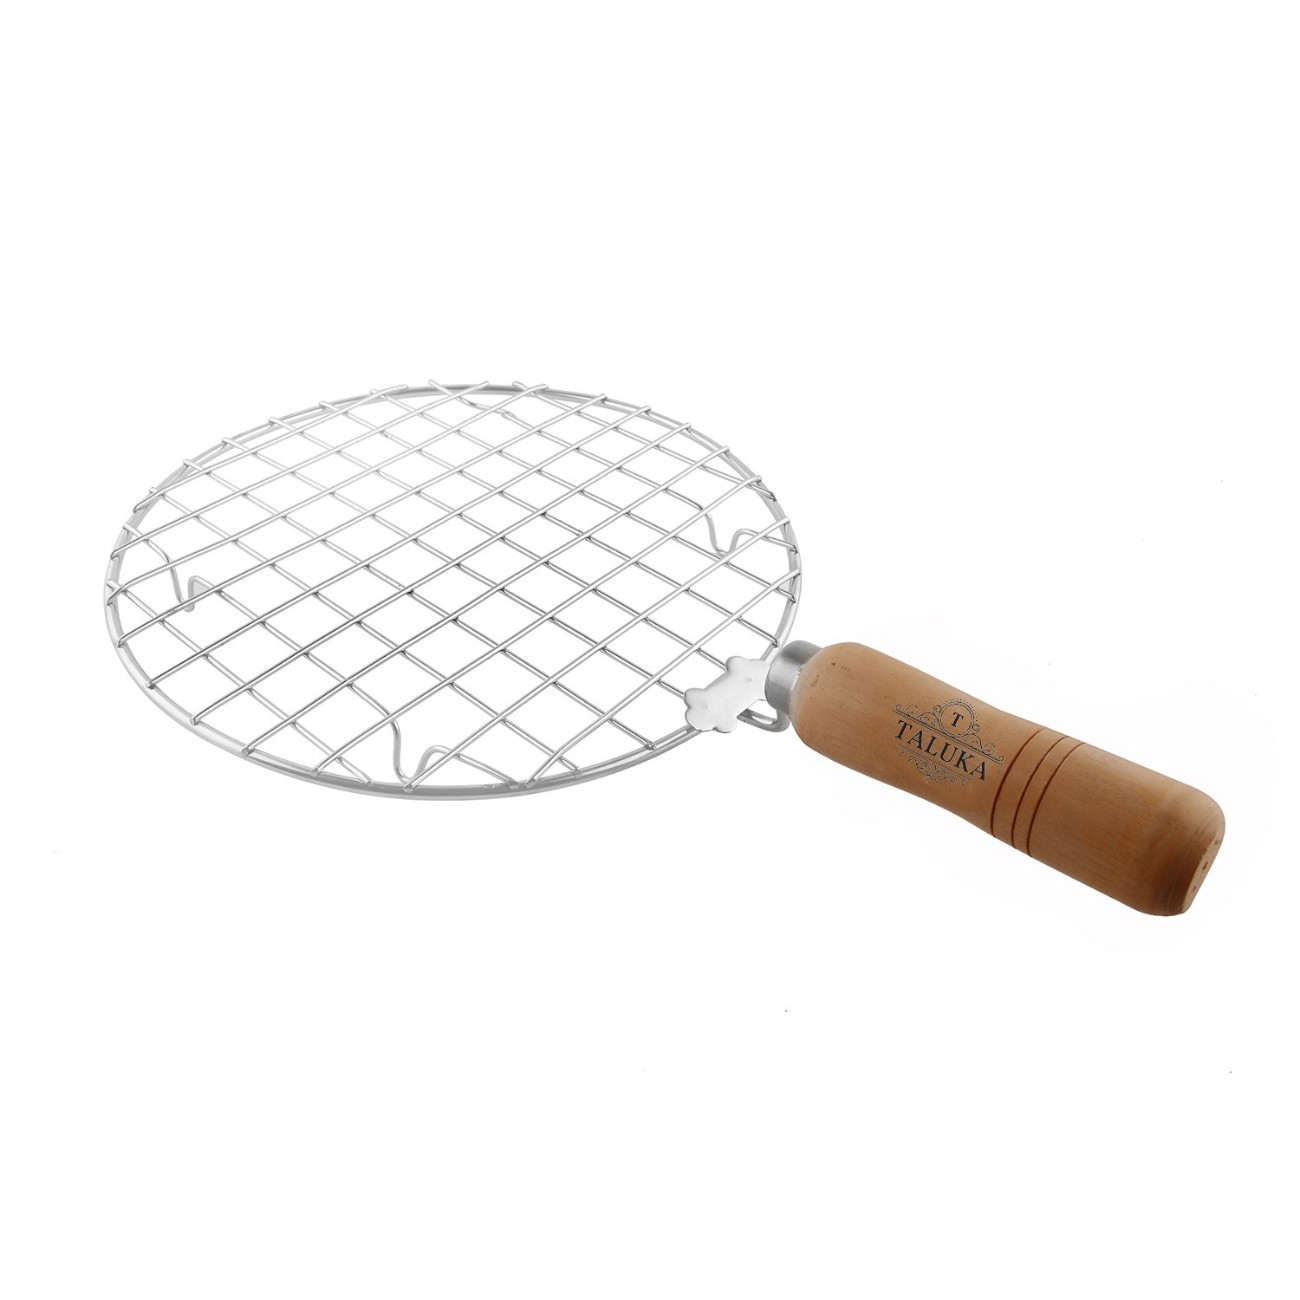 Stainless Steel Made Round Papad Jali Papad Maker Wooden Handle